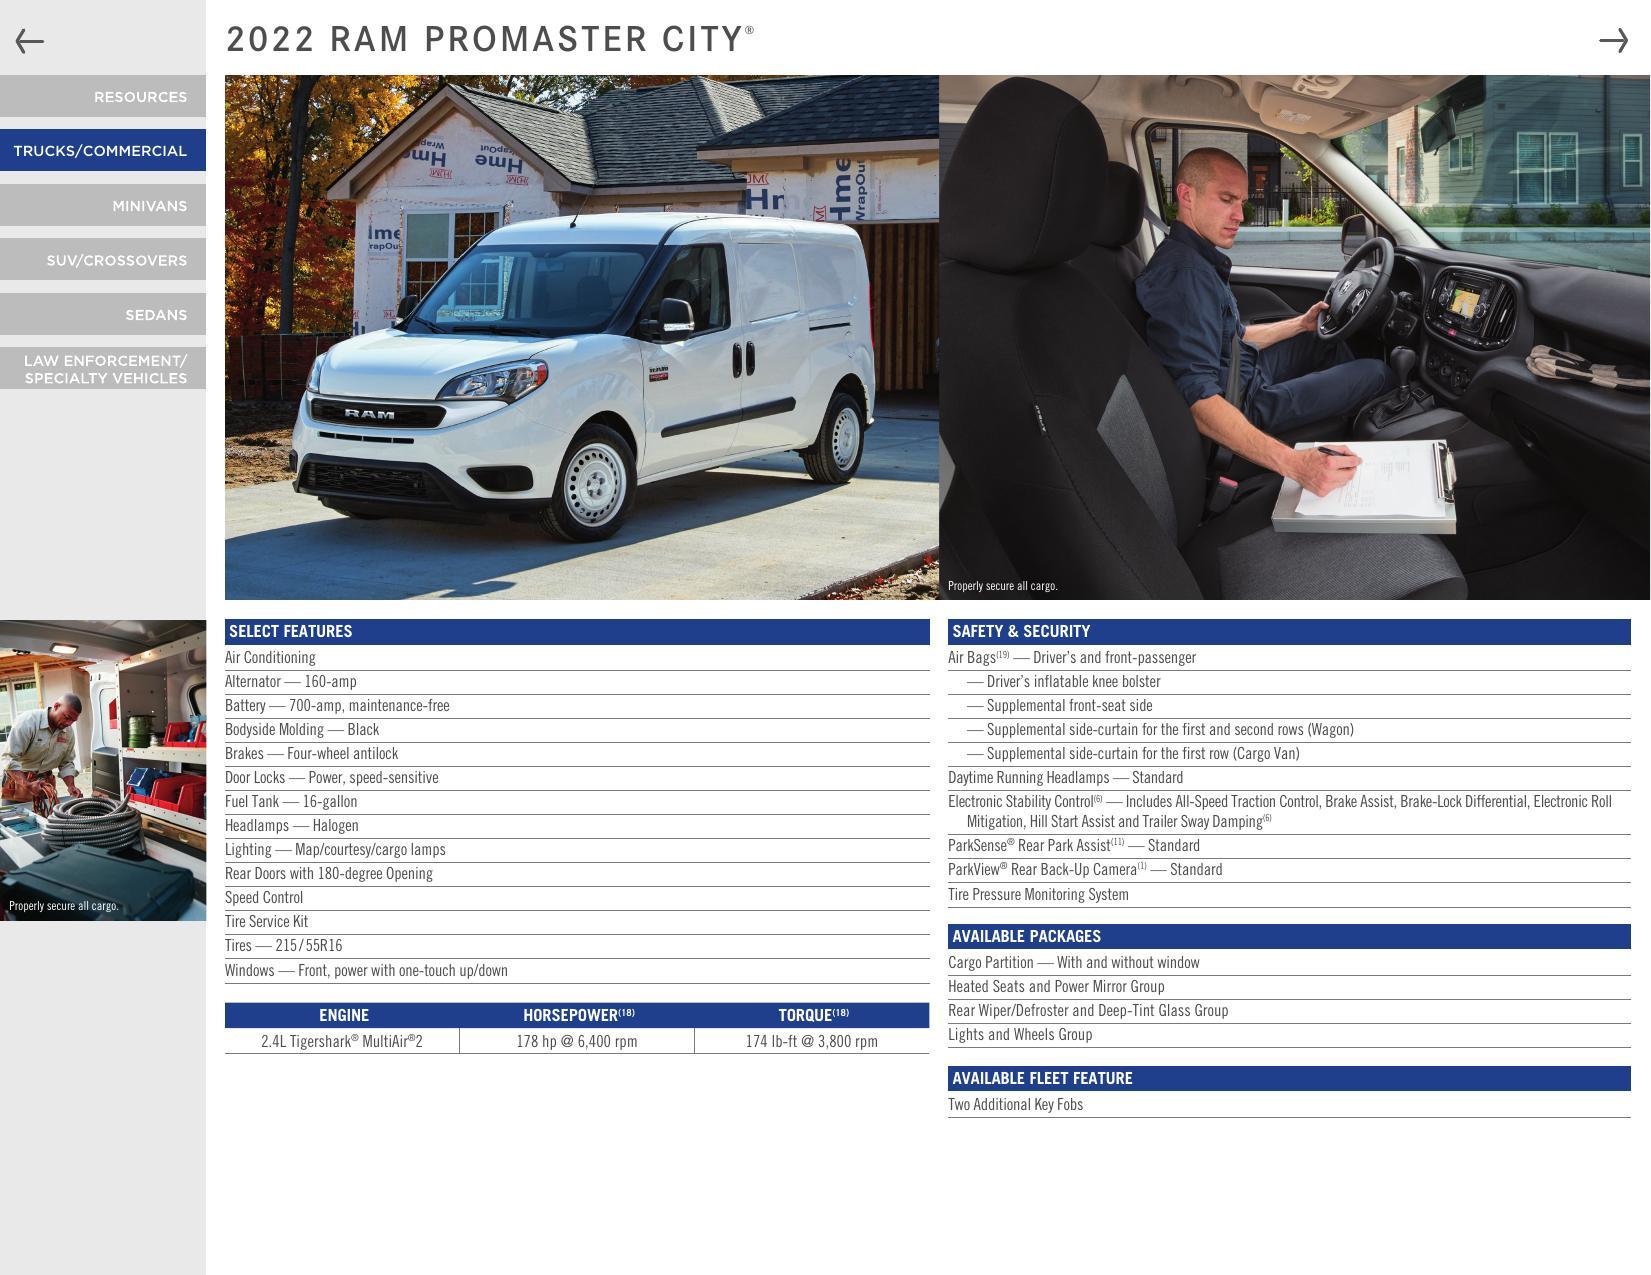 2022-ram-promaster-city-owners-manual.pdf